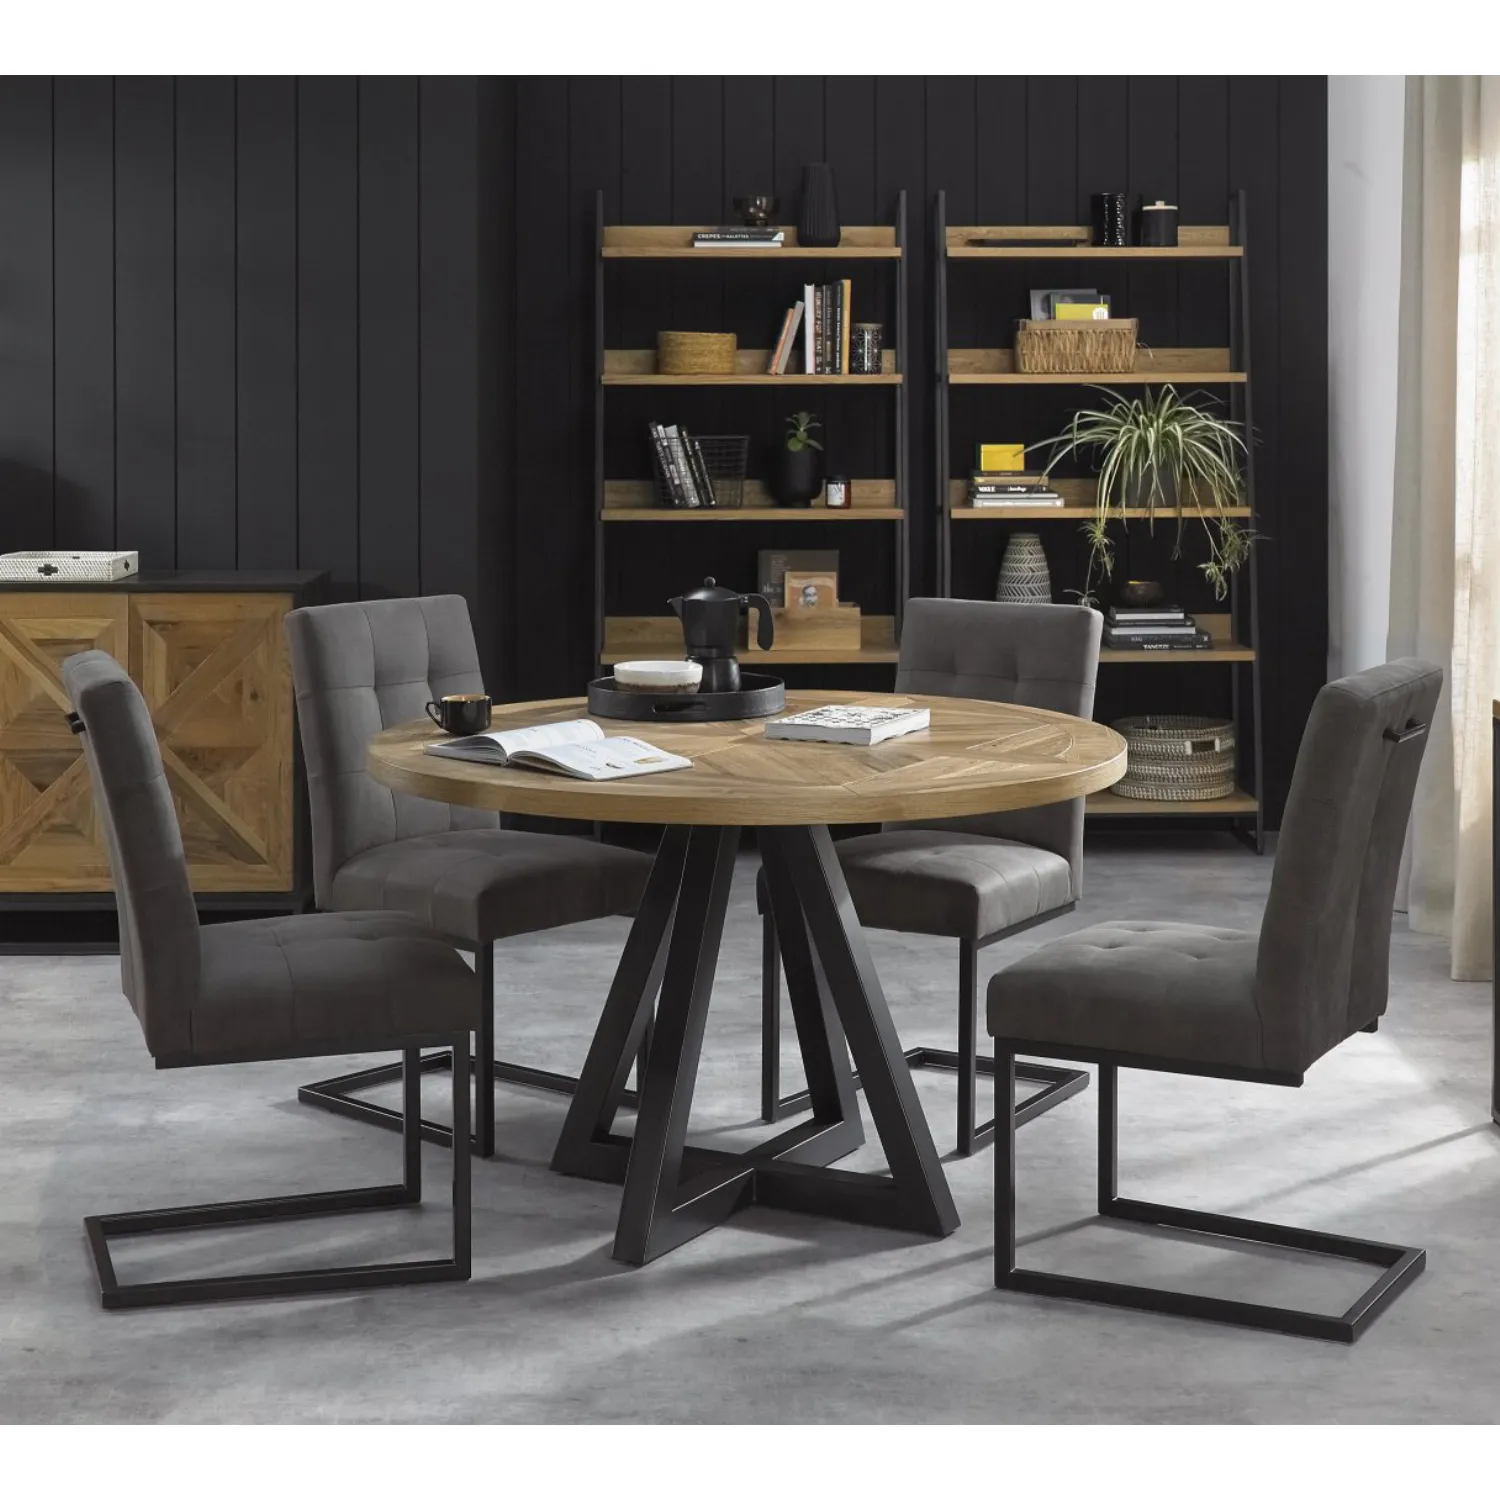 Rustic Oak Round Dining Table 4 Chairs in Dark Grey Fabric